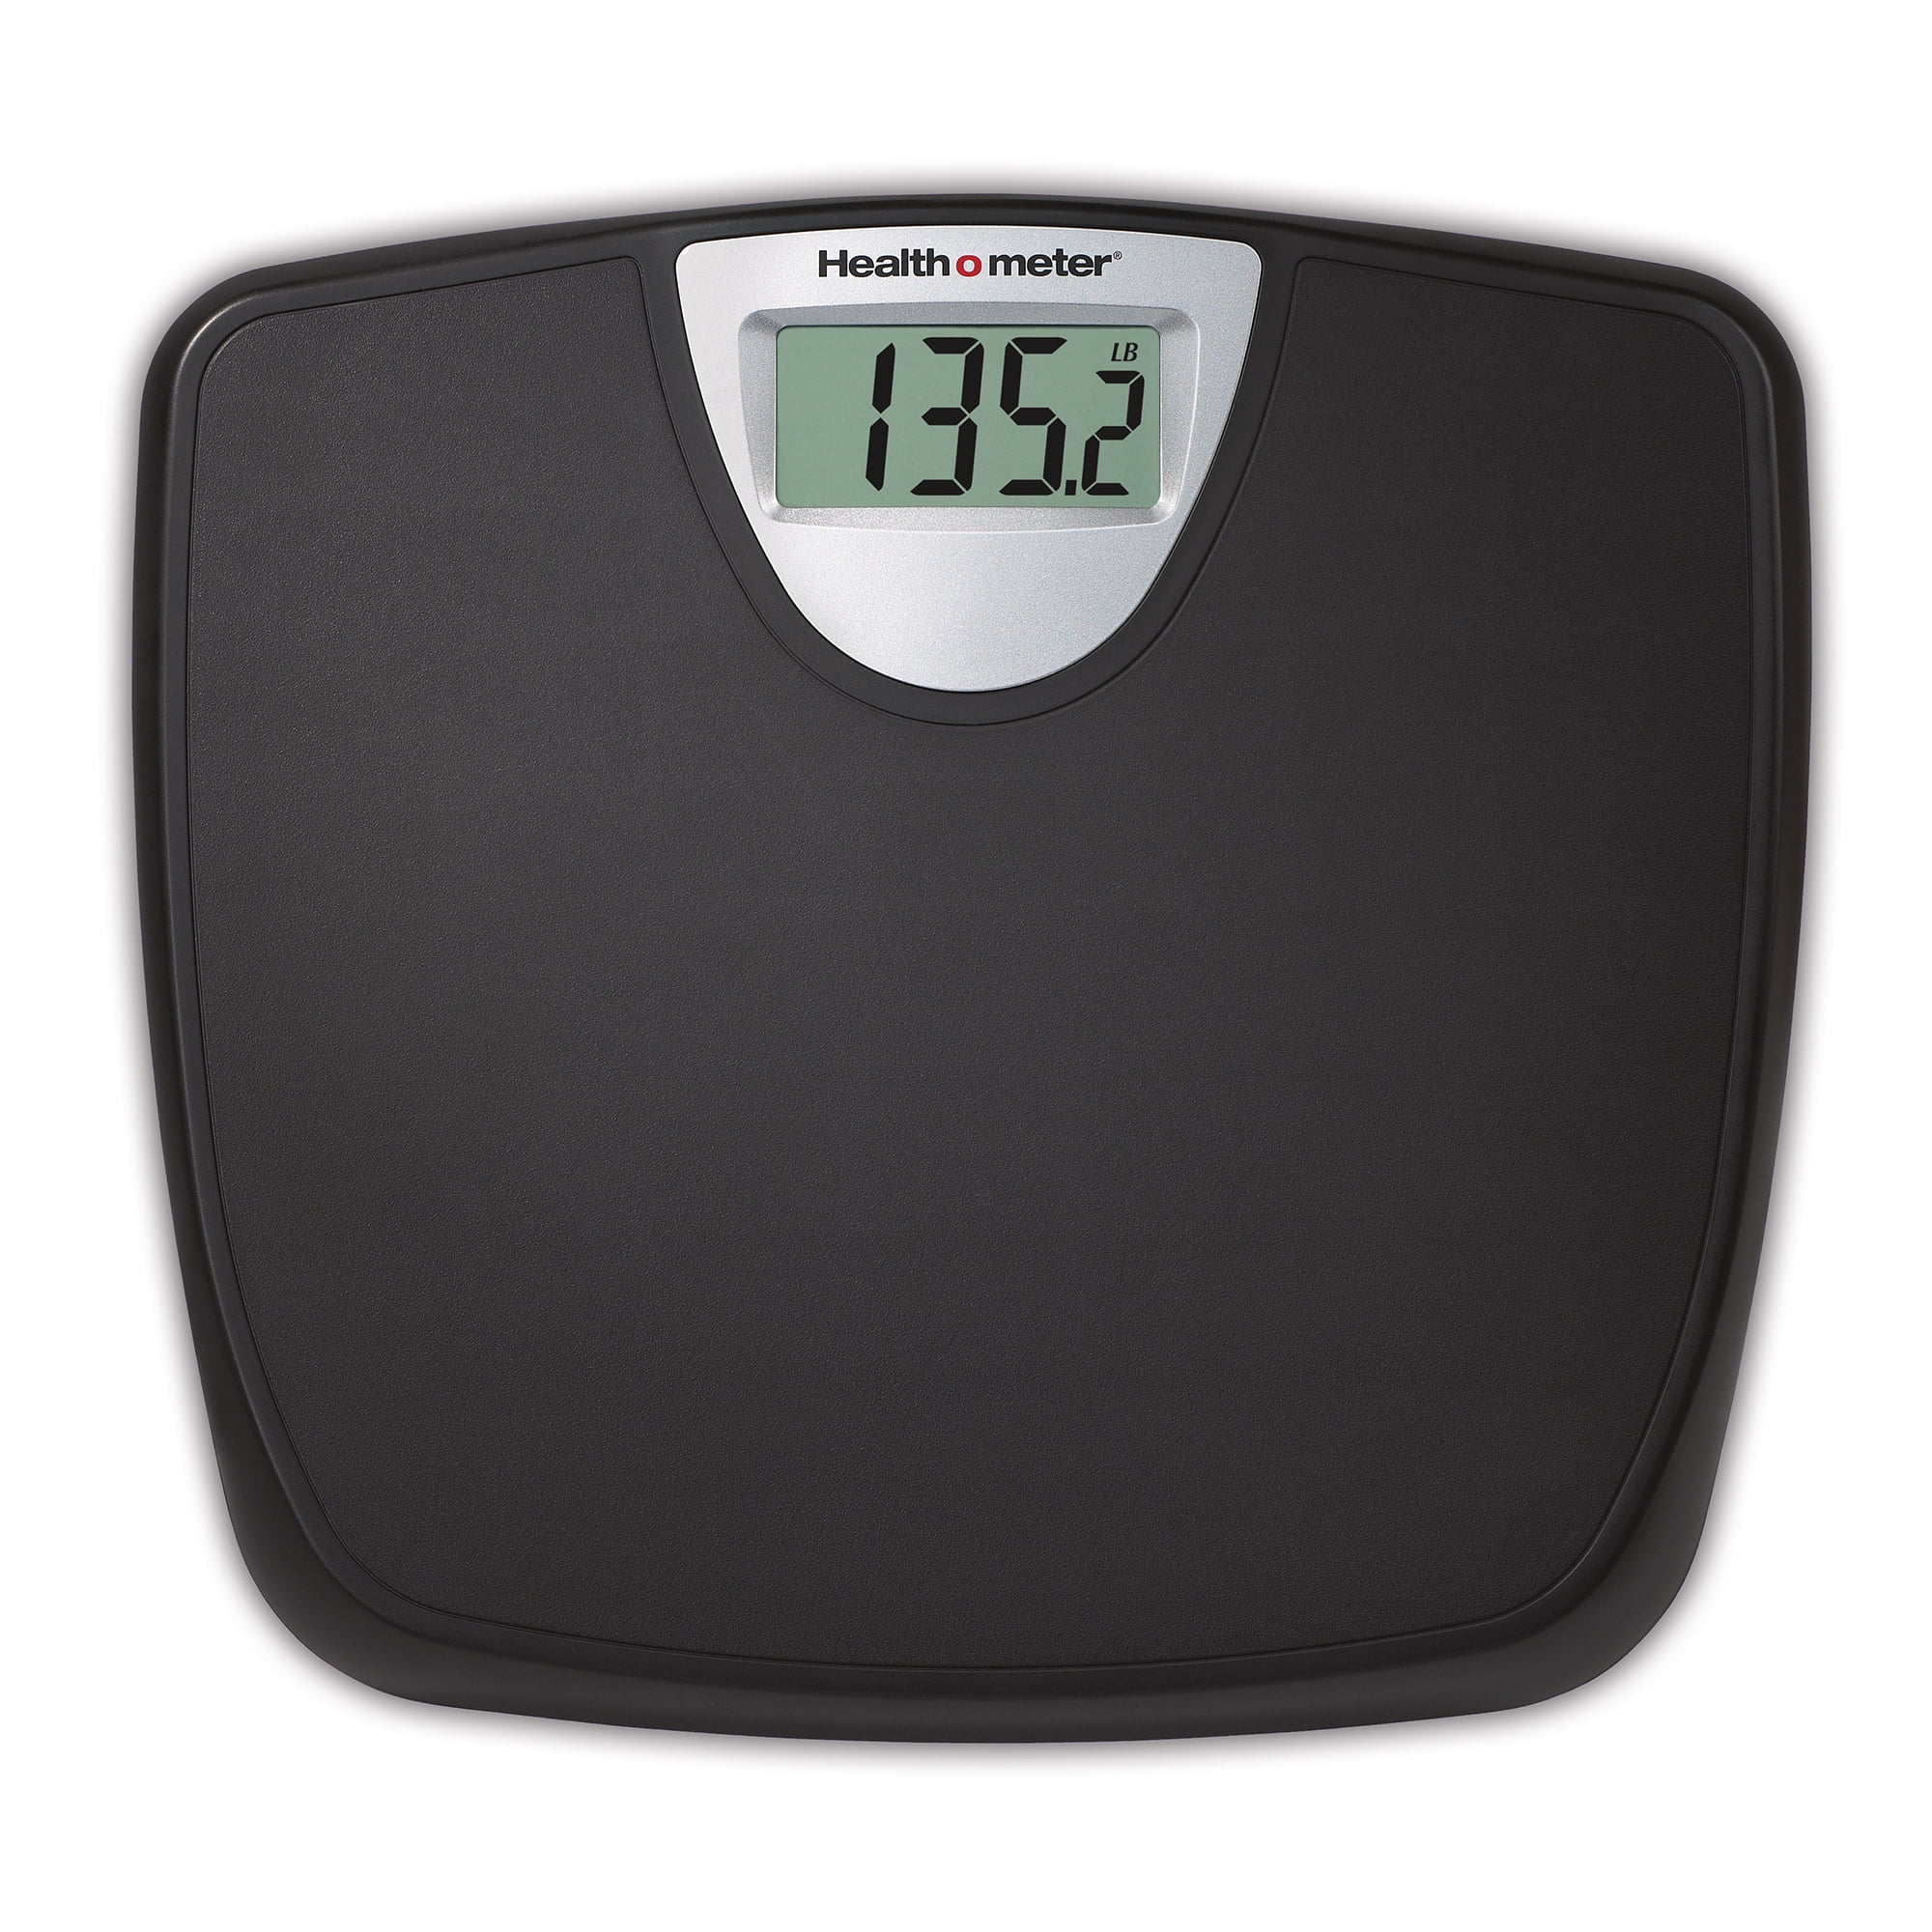 Slim Electronic Digital Bathroom Weighing Scale Battery Powered With LCD Display 